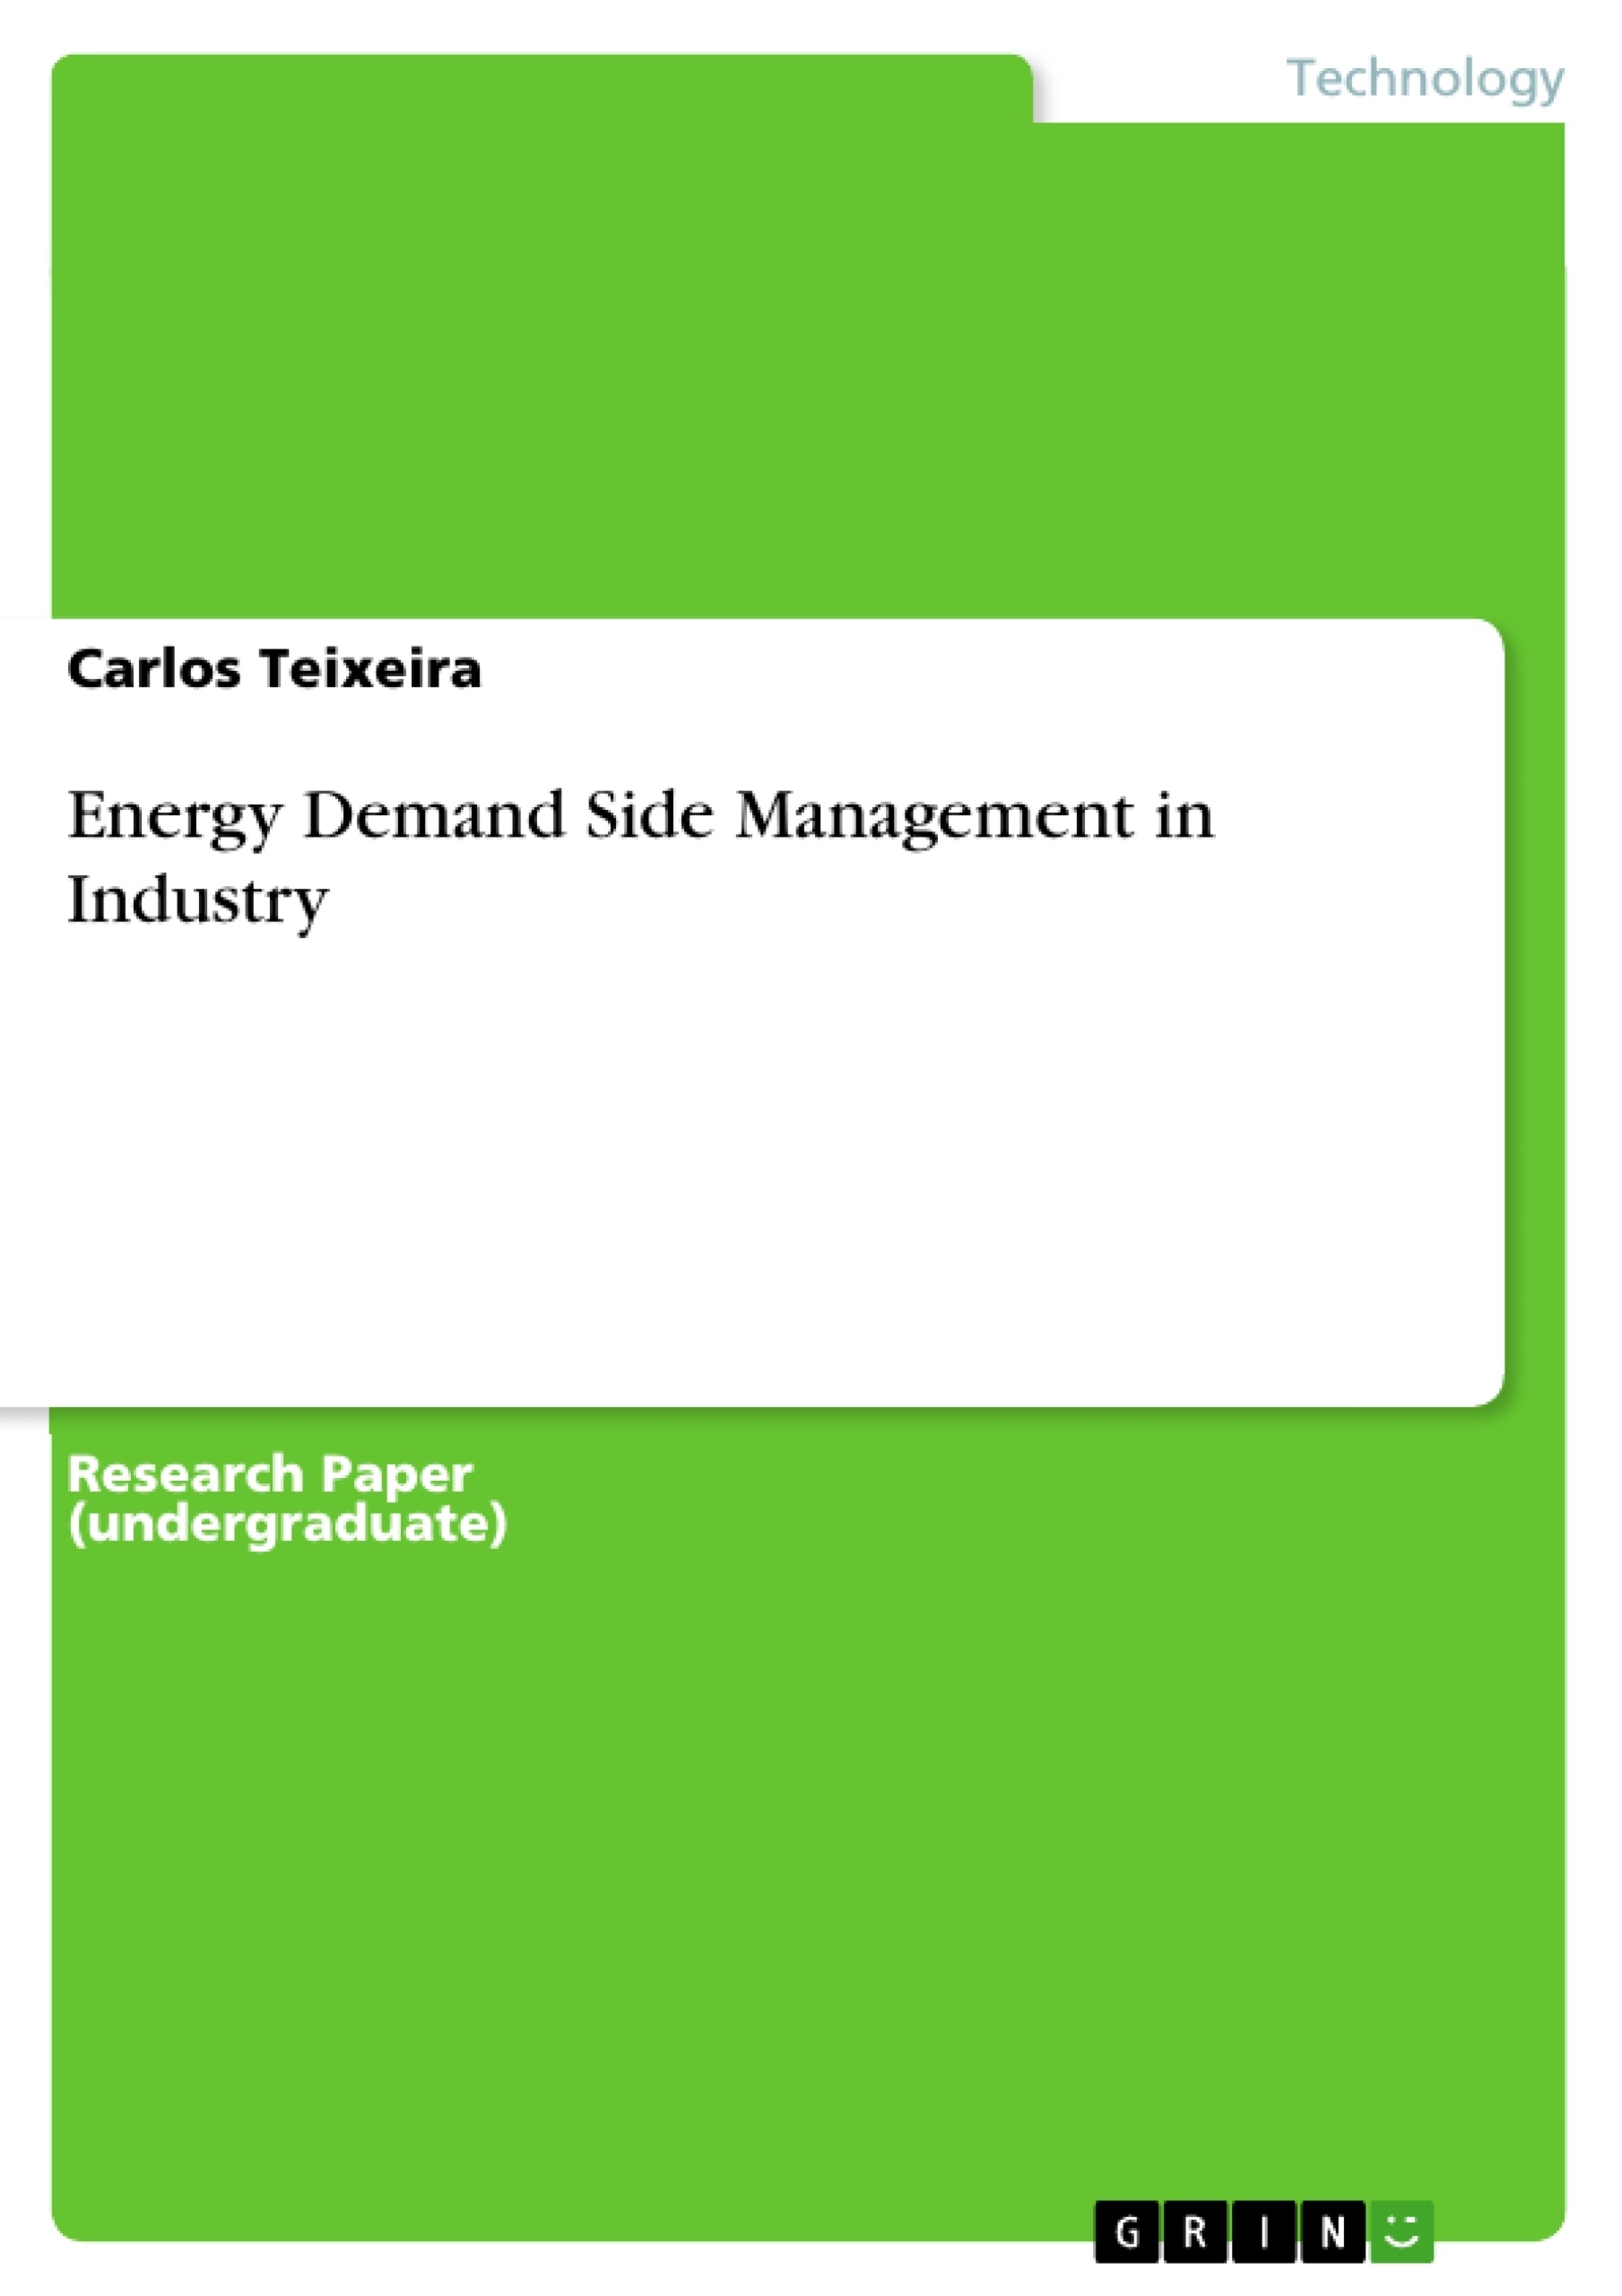 Titre: Energy Demand Side Management in Industry